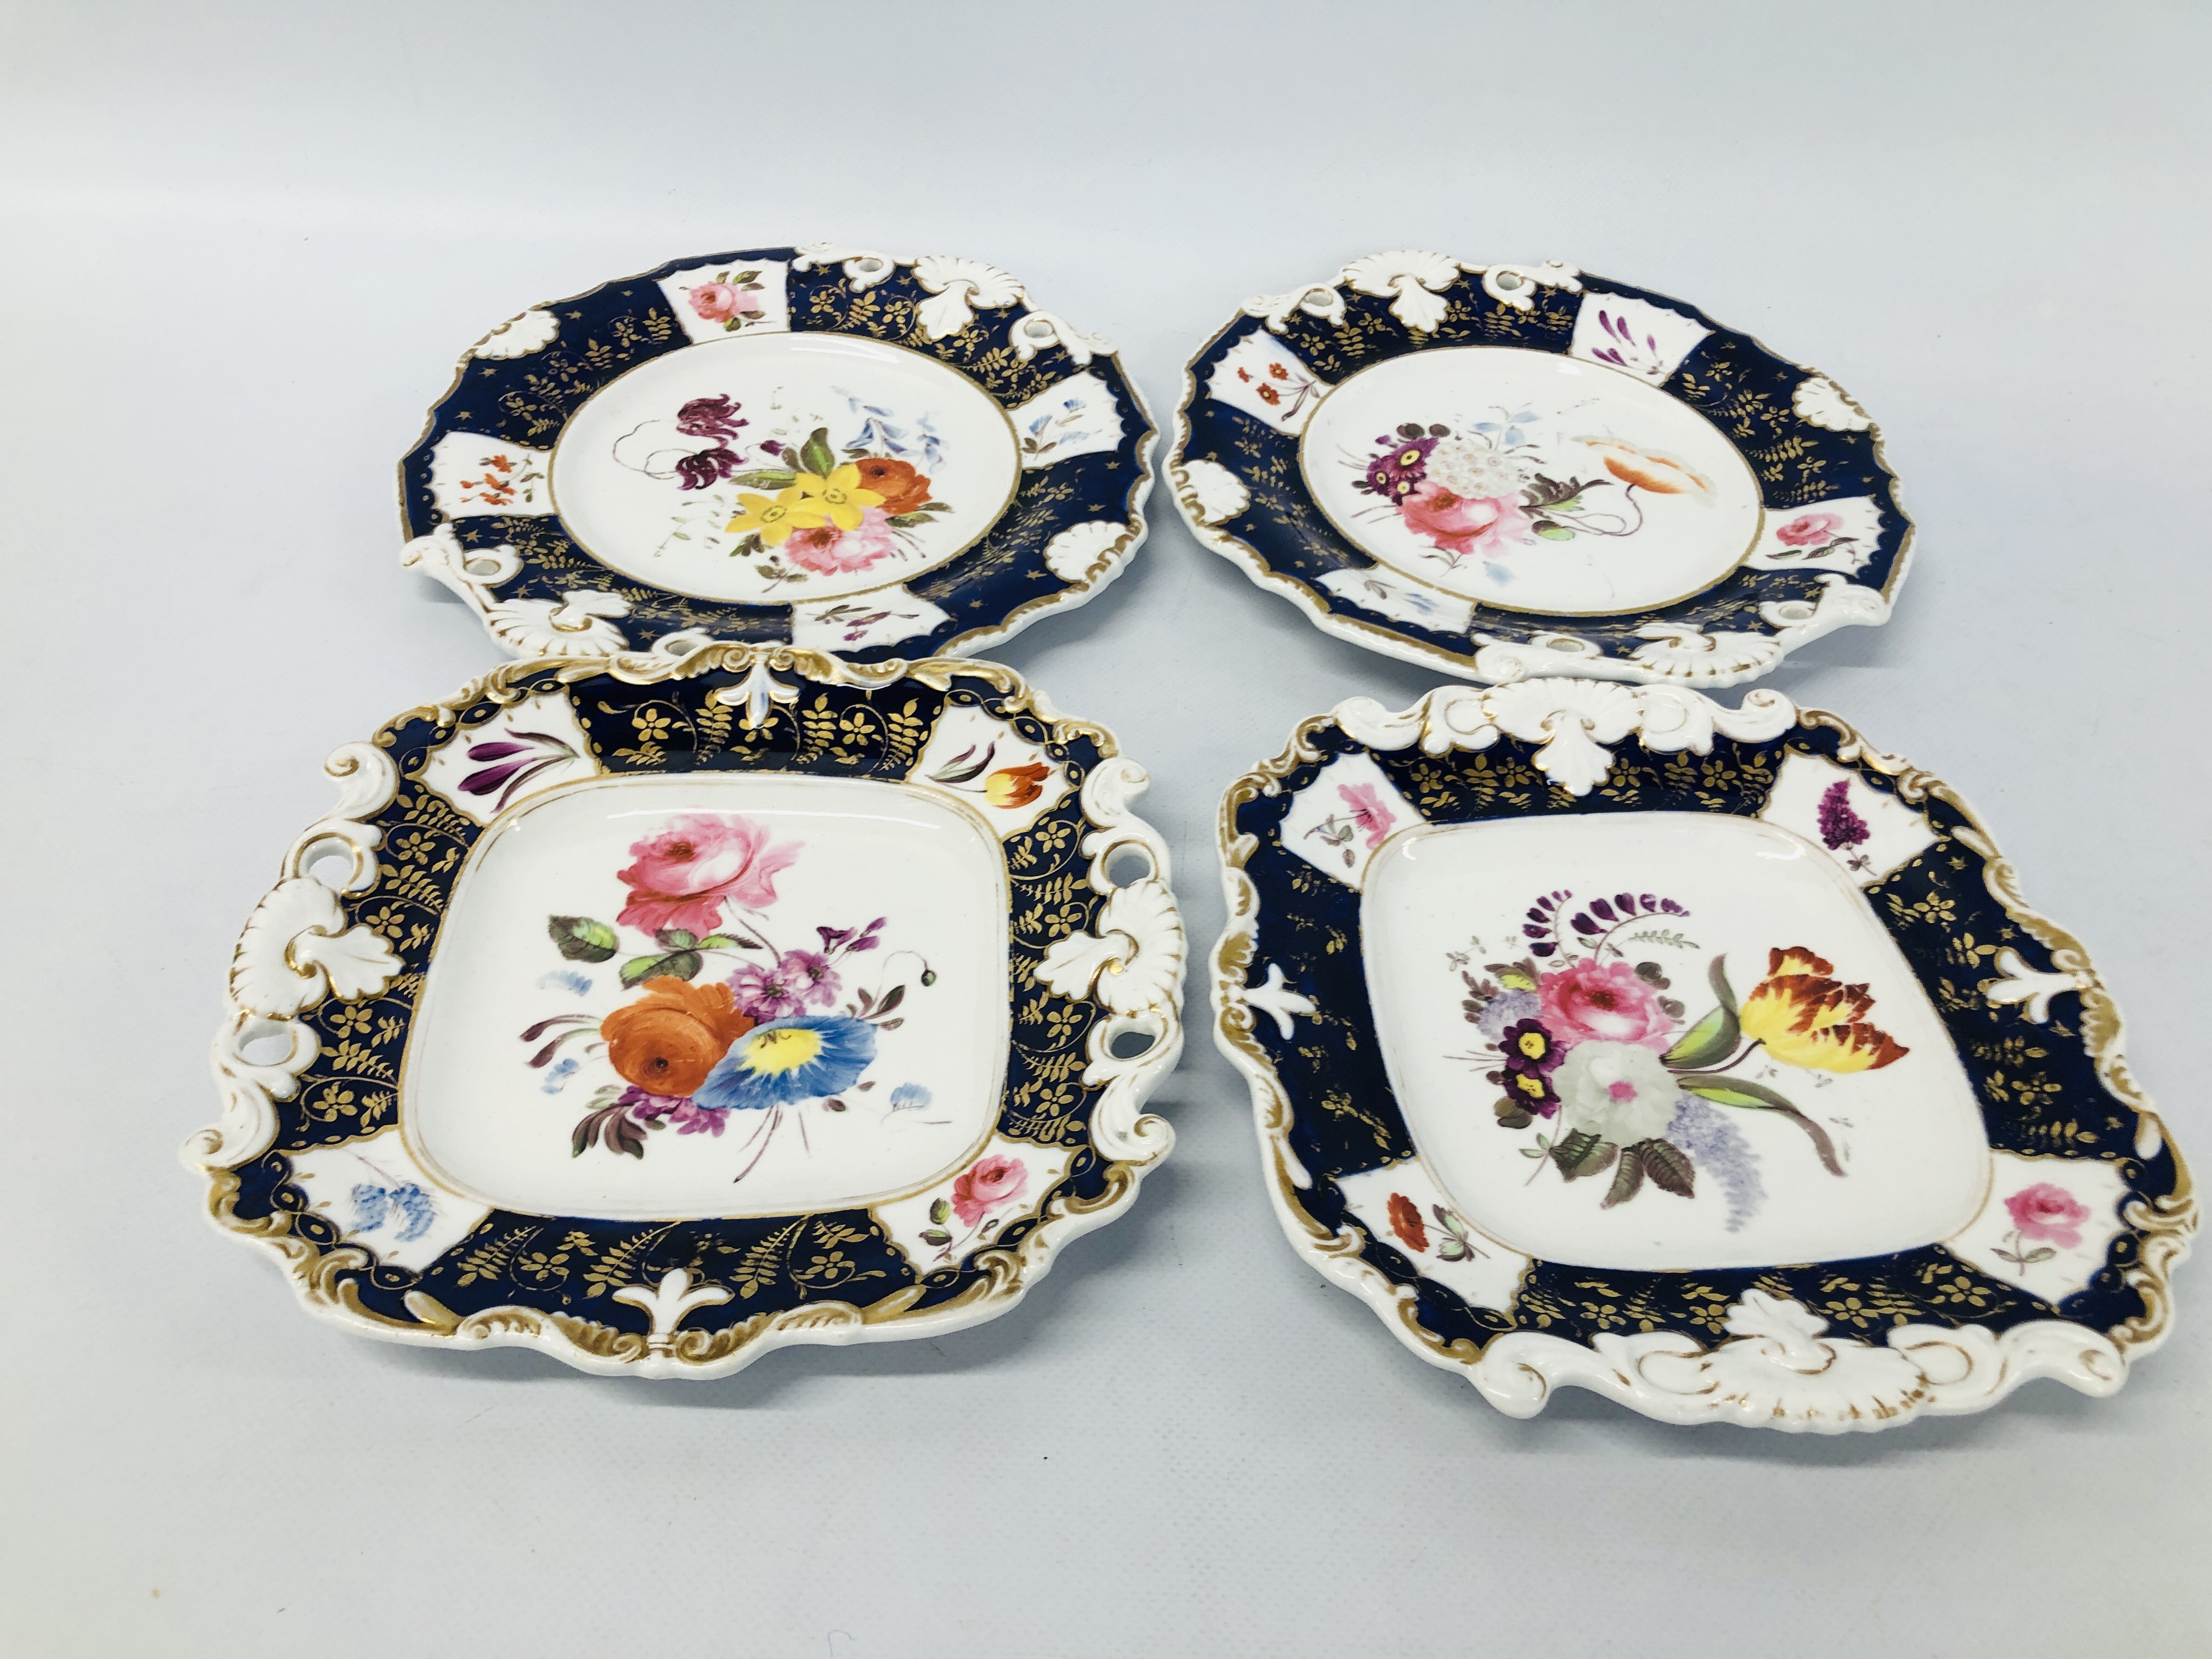 COLLECTION OF PERIOD PLATES TO INCLUDE A SET OF 4 HANDPAINTED FLORAL PATTERN PLATES "3090", - Image 16 of 17